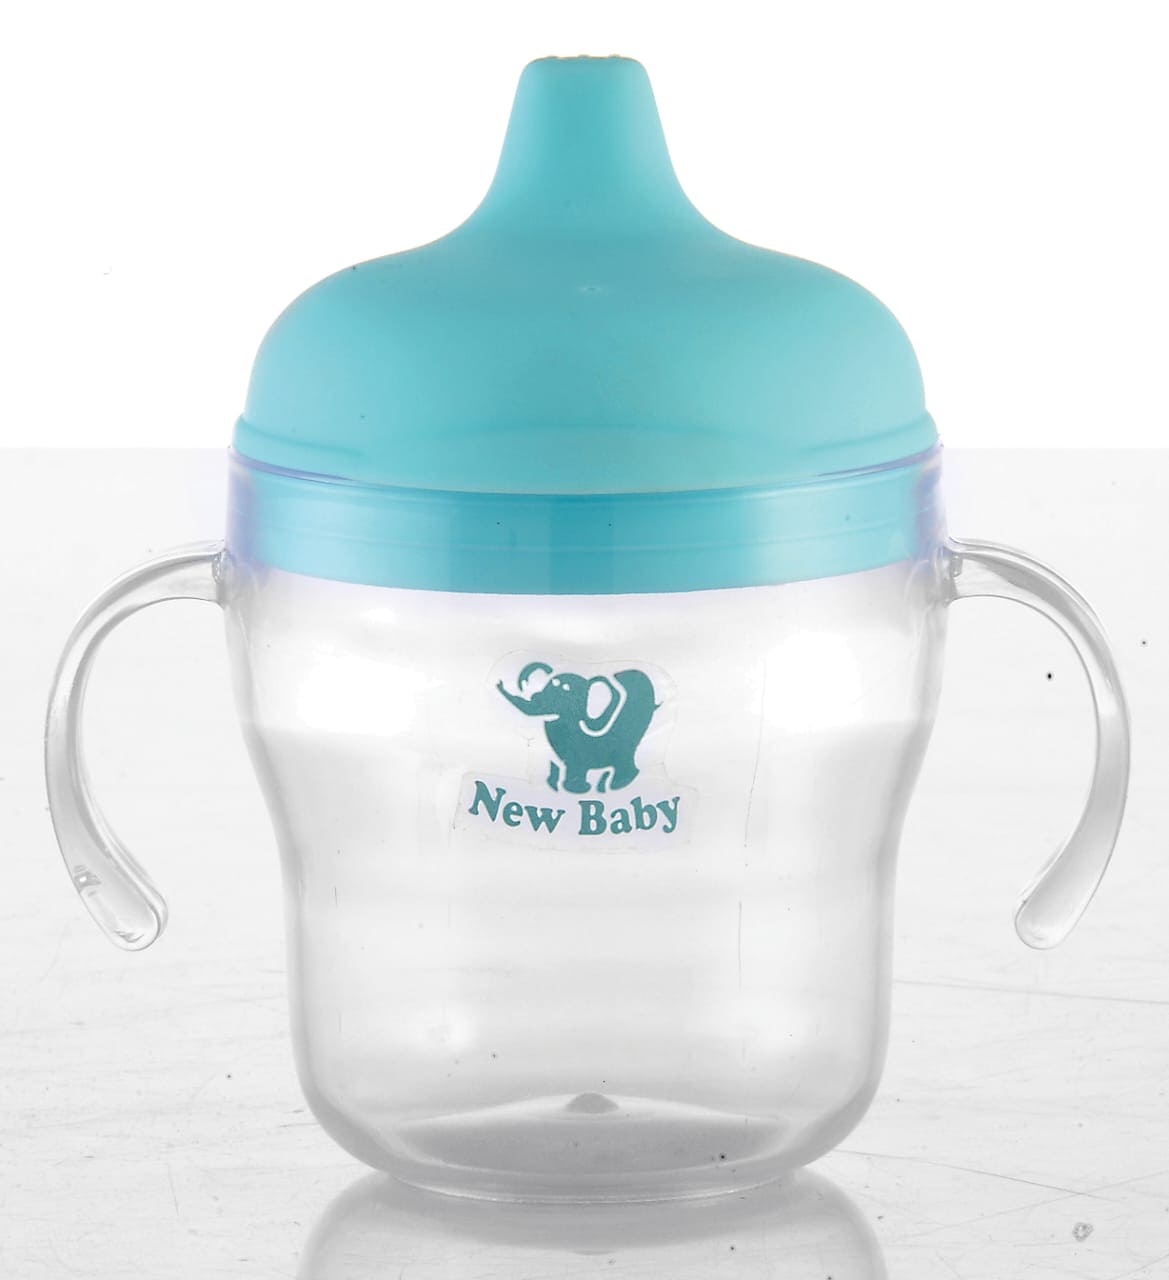 Baby Feeding Sipper, Baby Sippy Spout Cup with Handles, 250ml Angle Drinking Cup